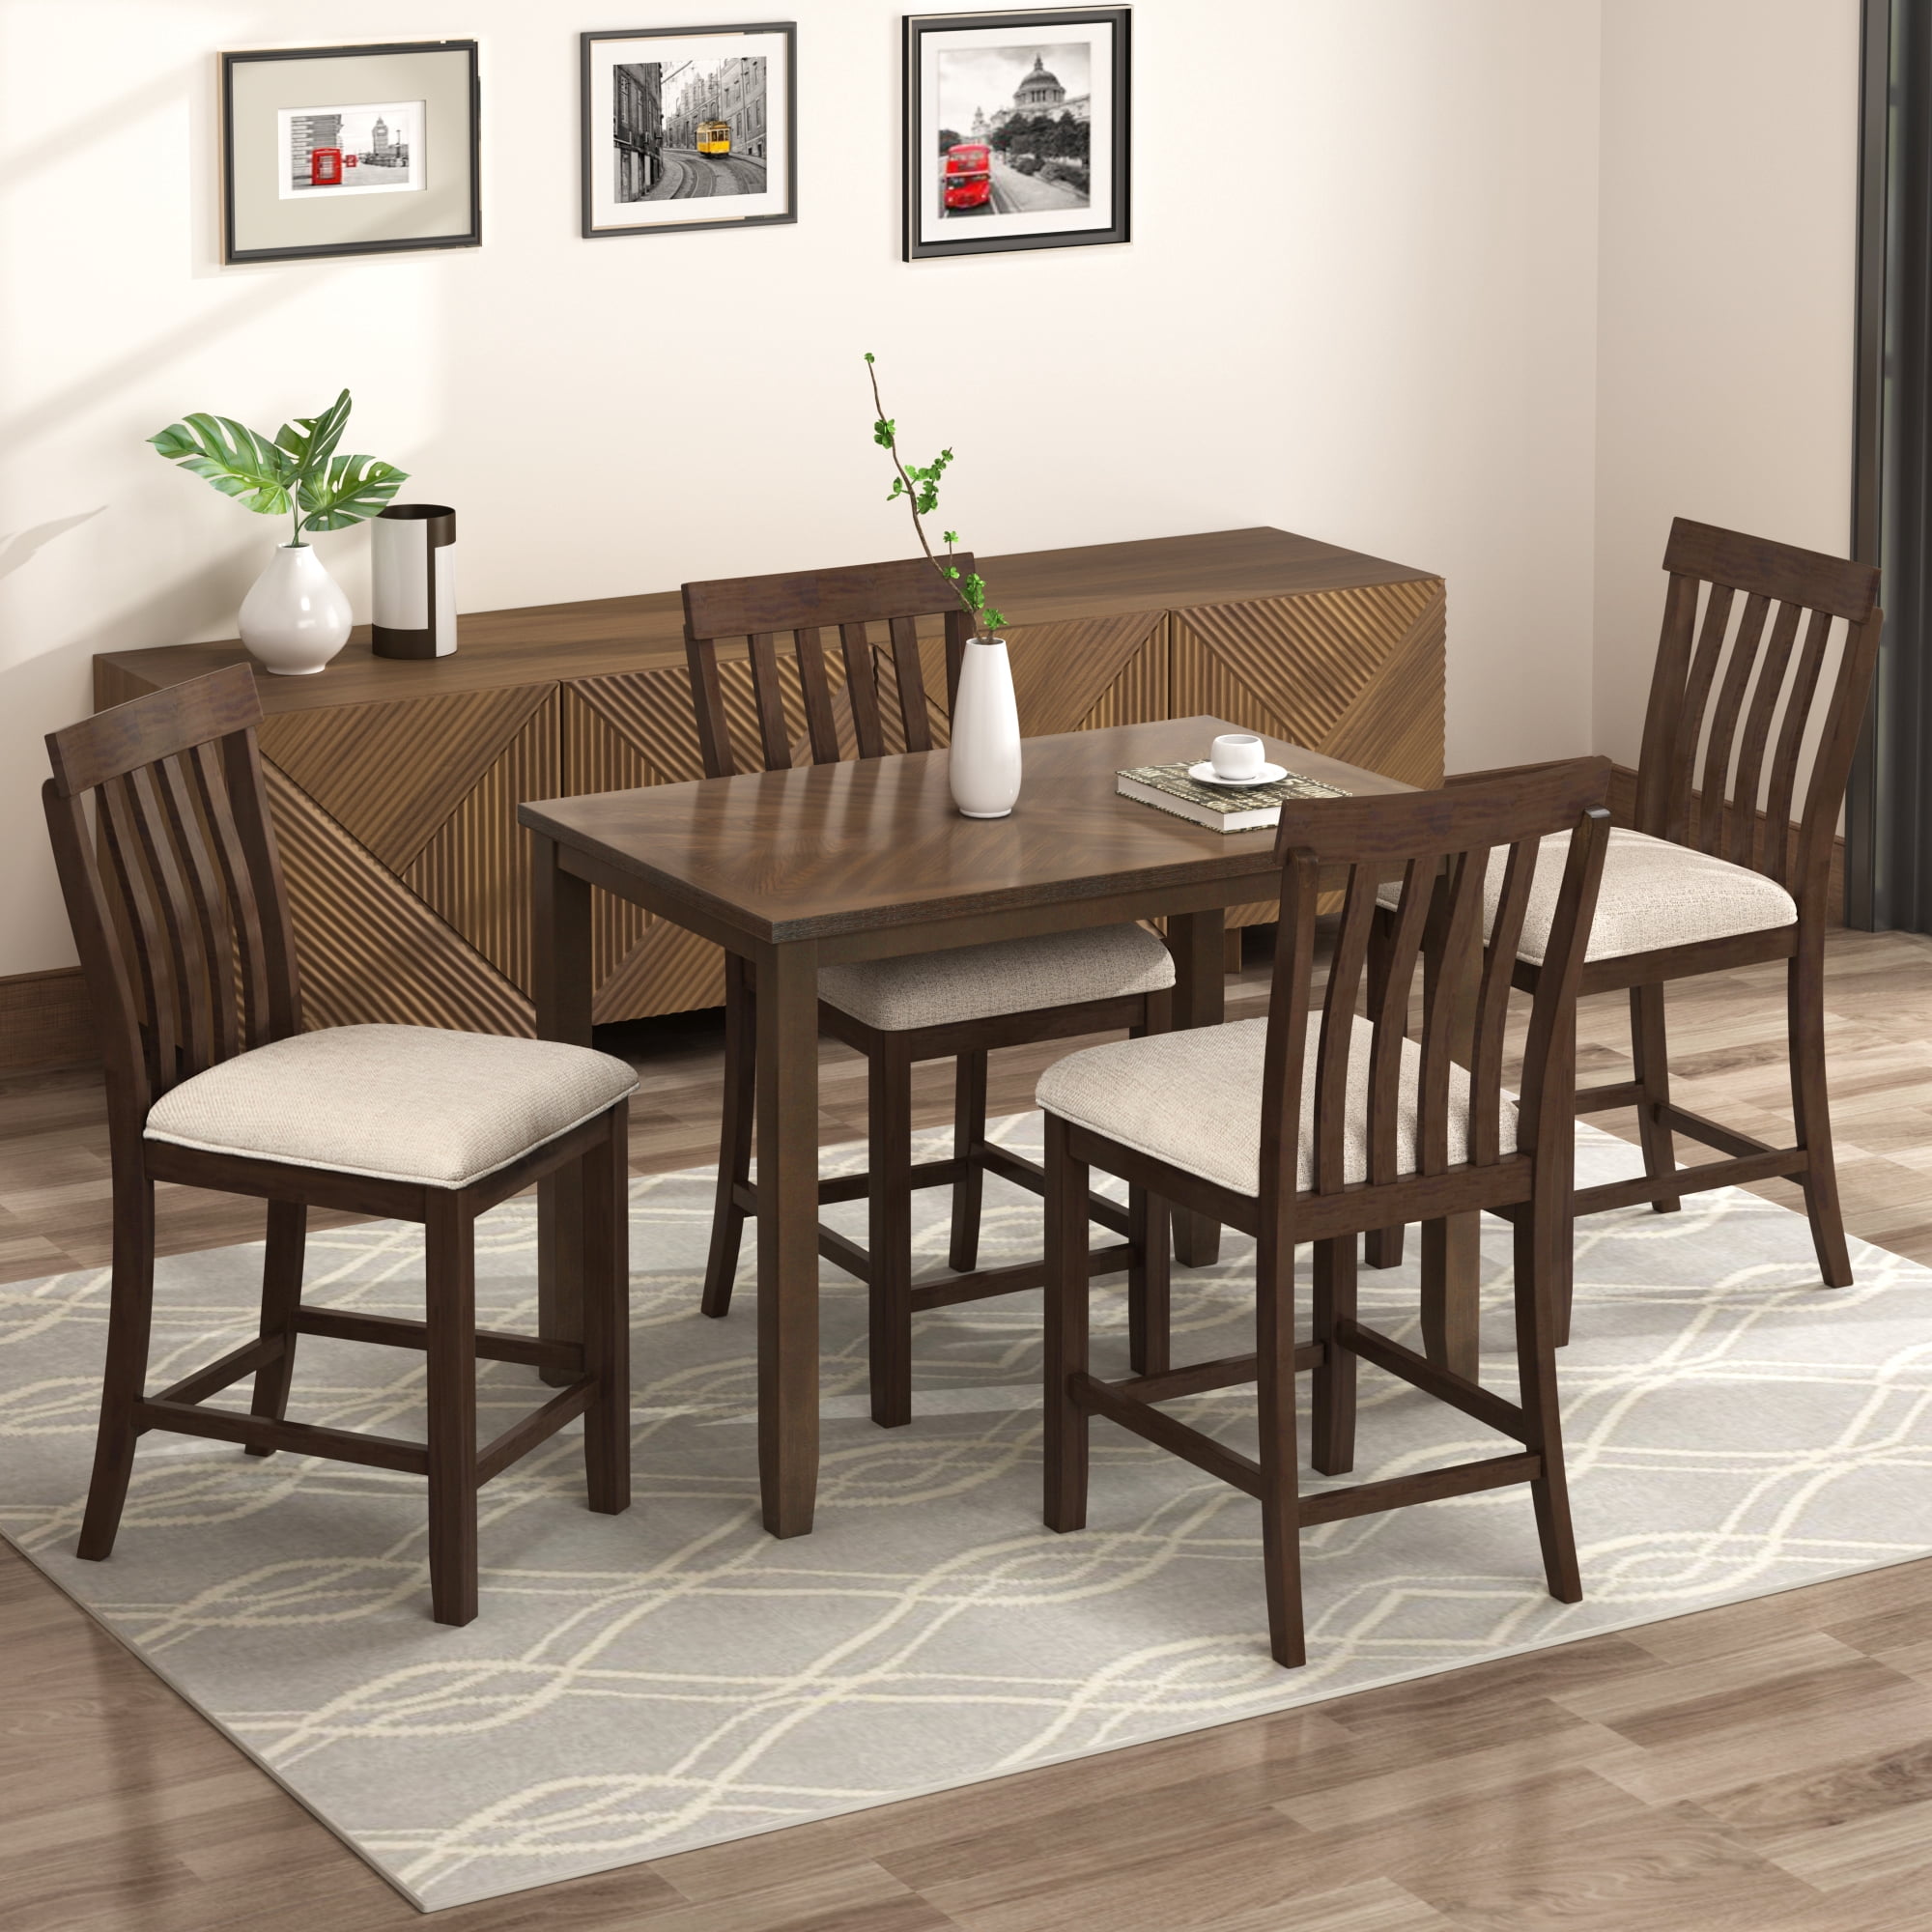 5 Piece Dining Table And Chair Set